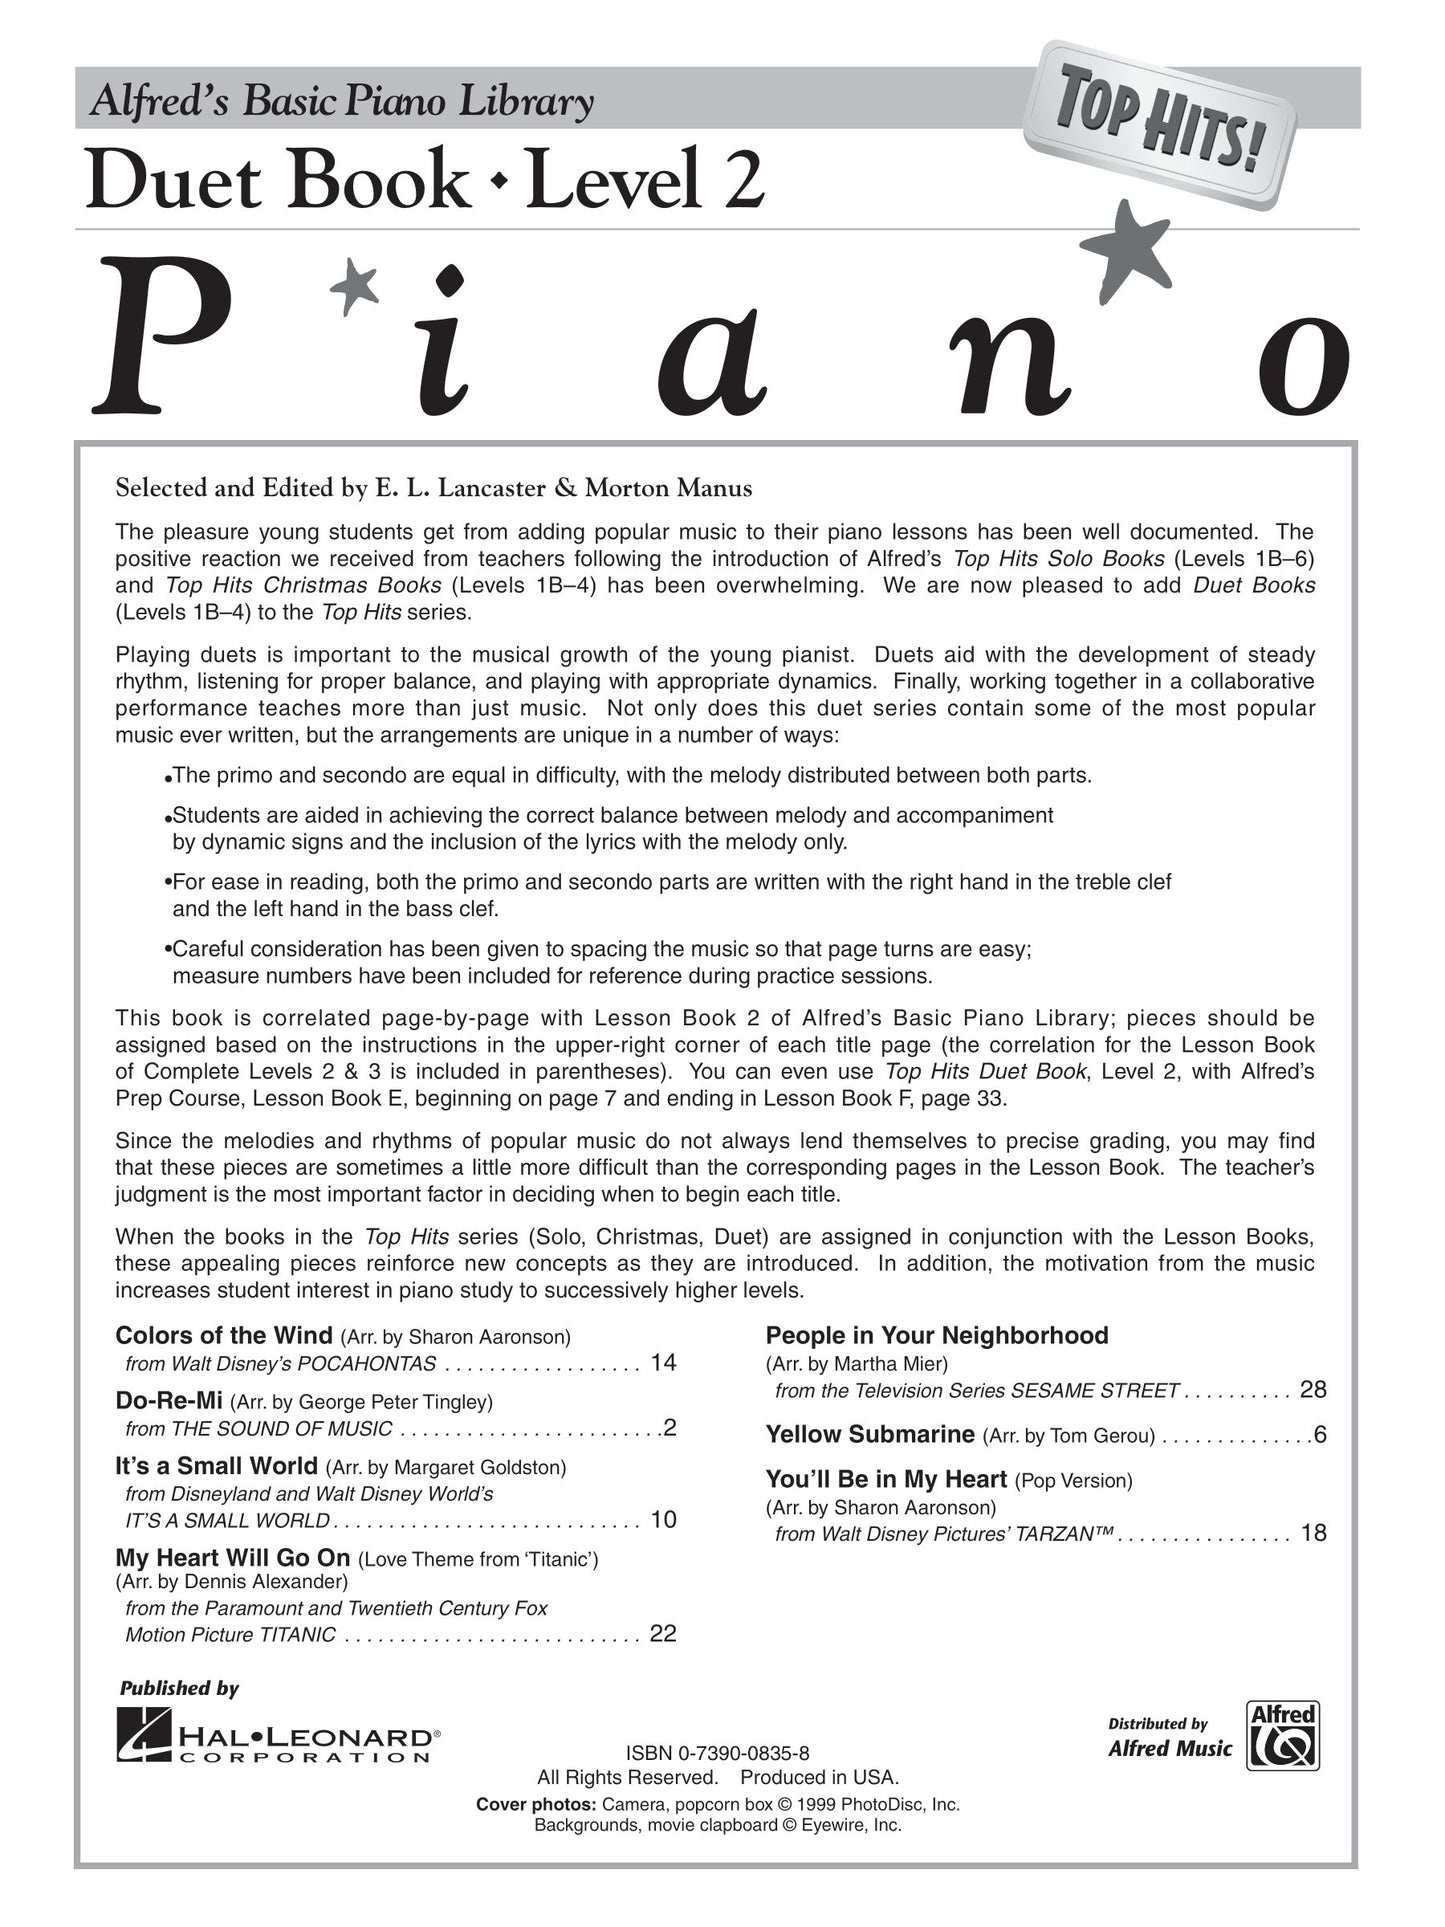 Alfred's Basic Piano Library - Top Hits Duet Level 2 Book